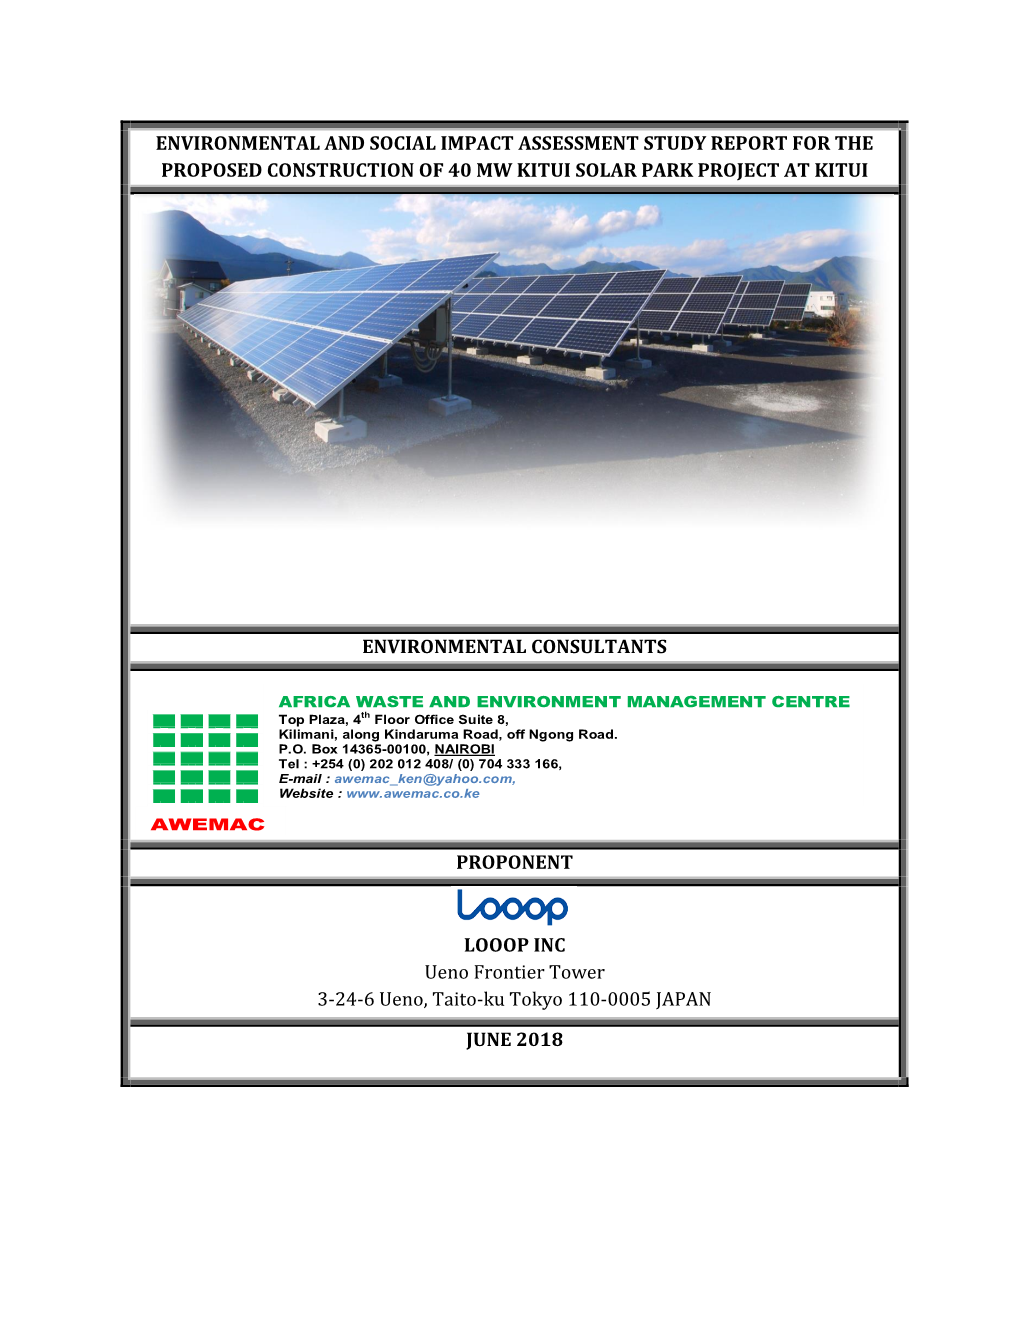 Environmental and Social Impact Assessment Study Report for the Proposed Construction of 40 Mw Kitui Solar Park Project at Kitui